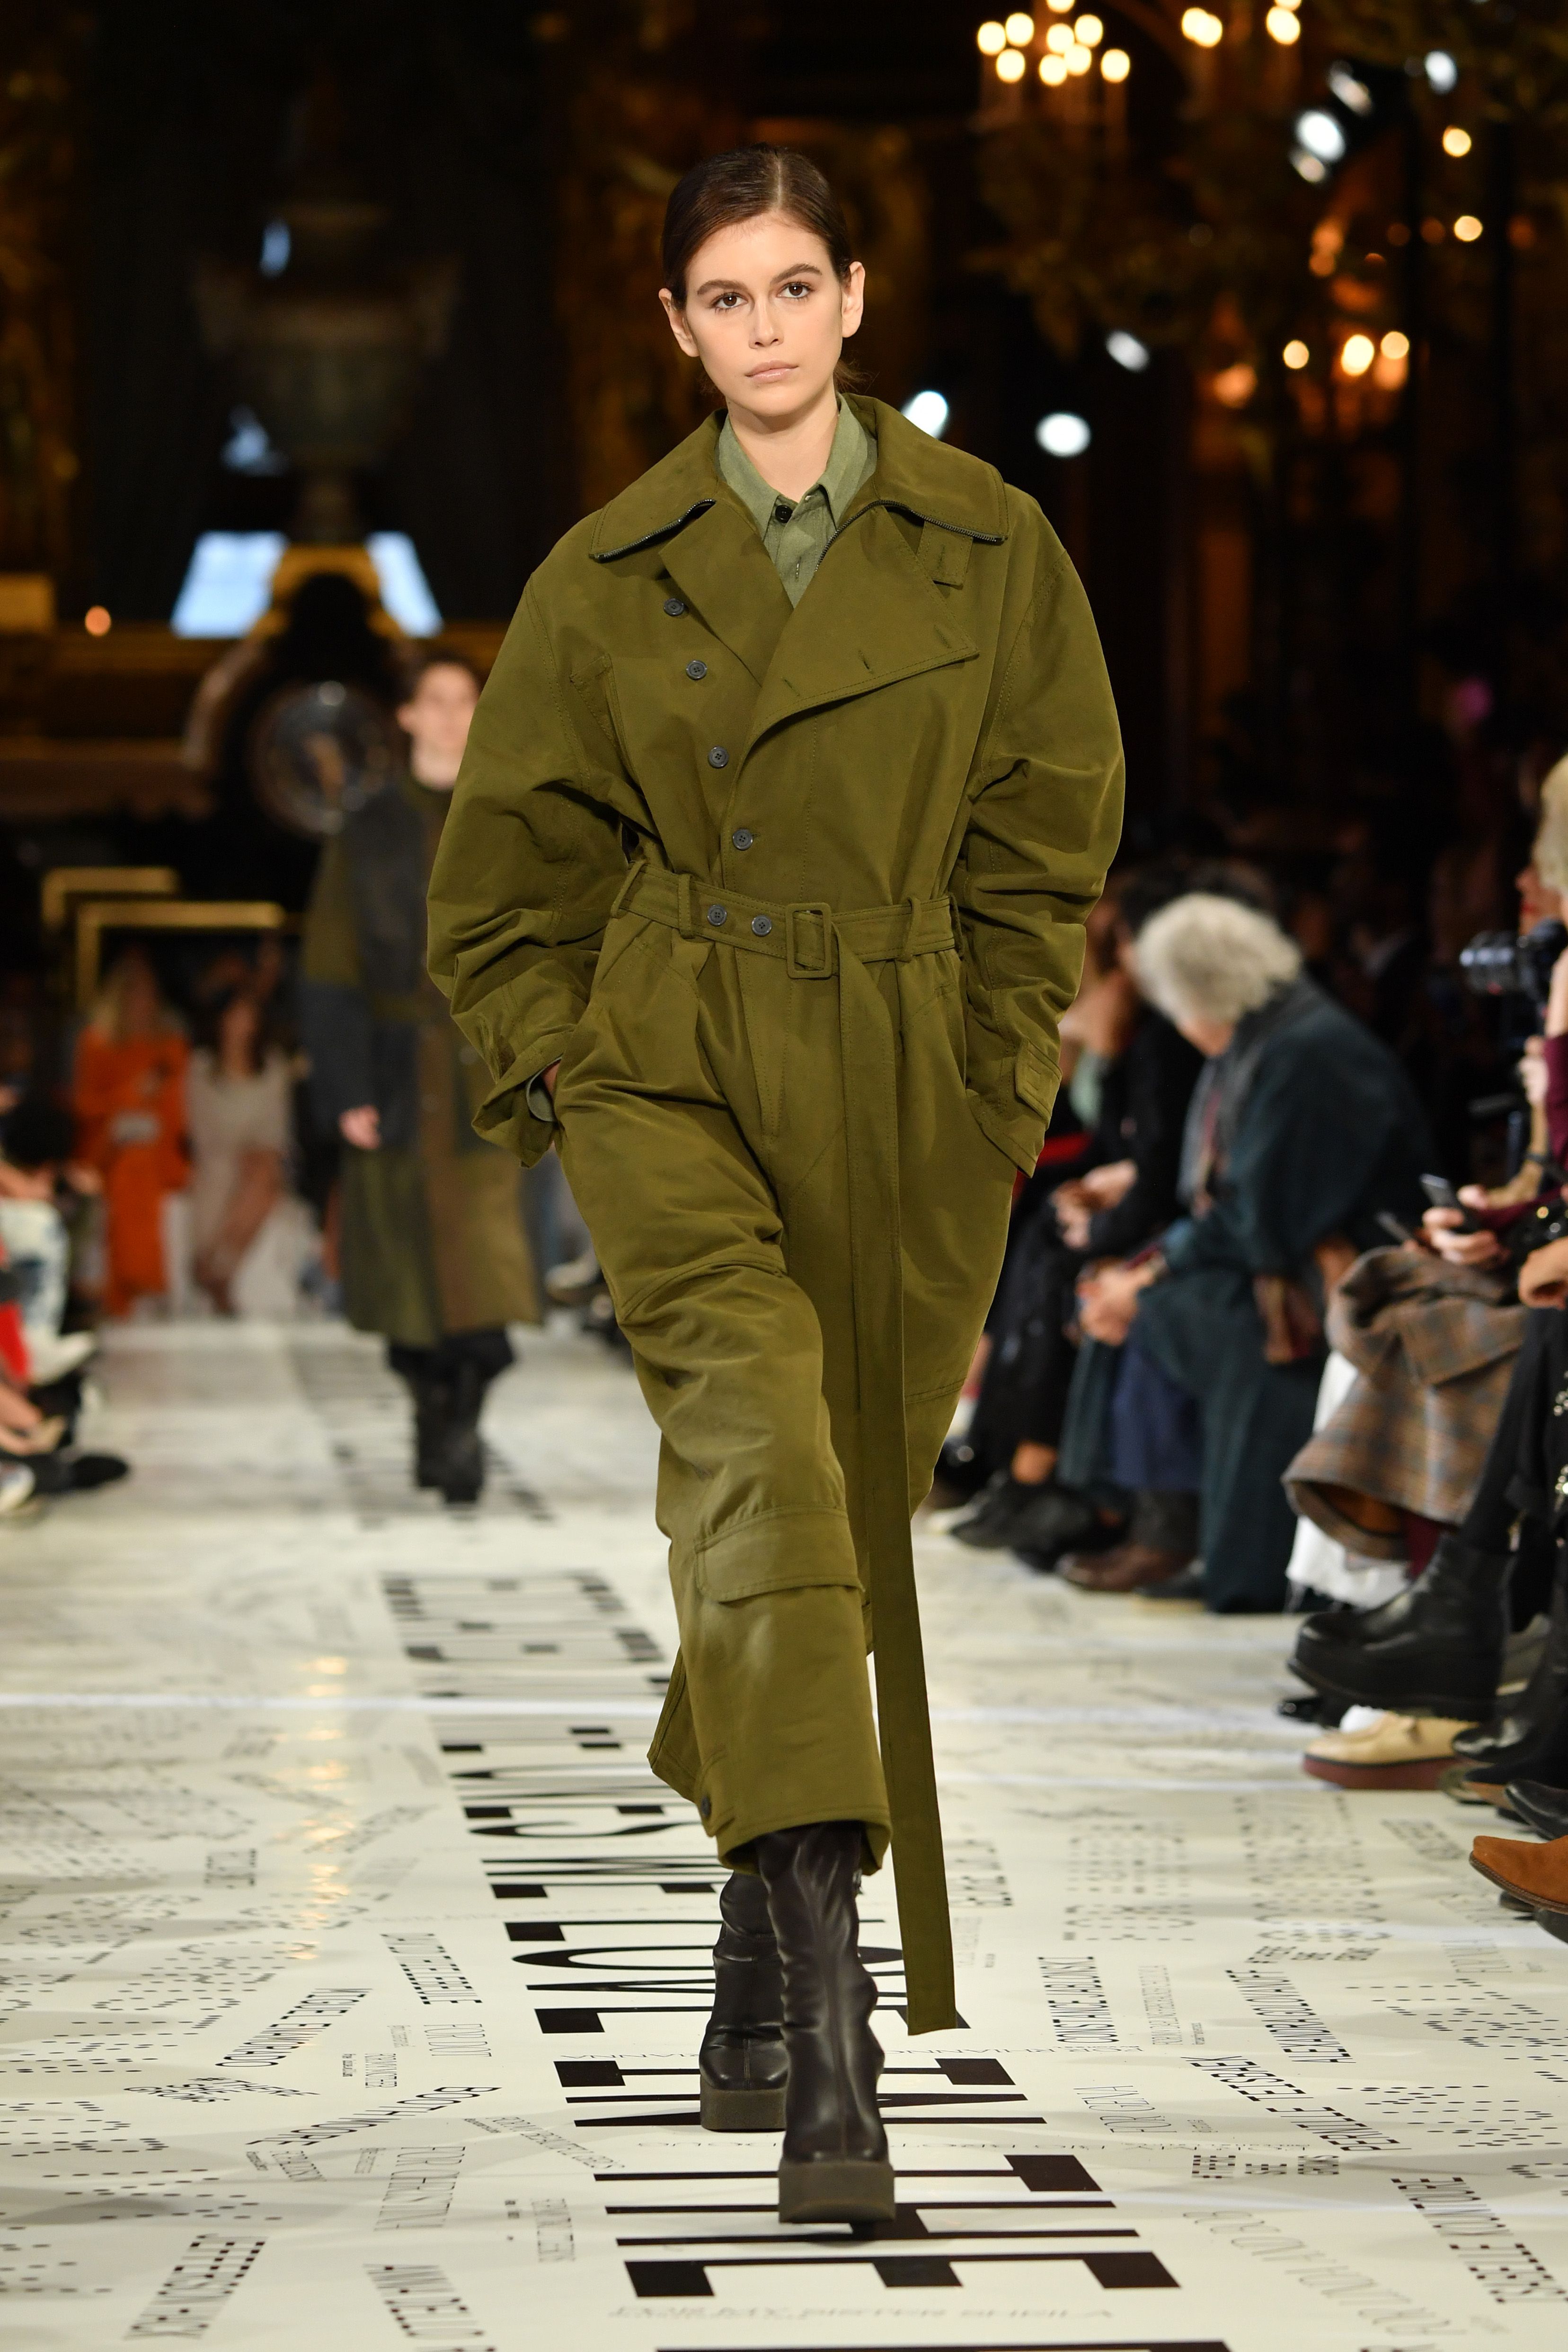 the Trend: Boilersuits